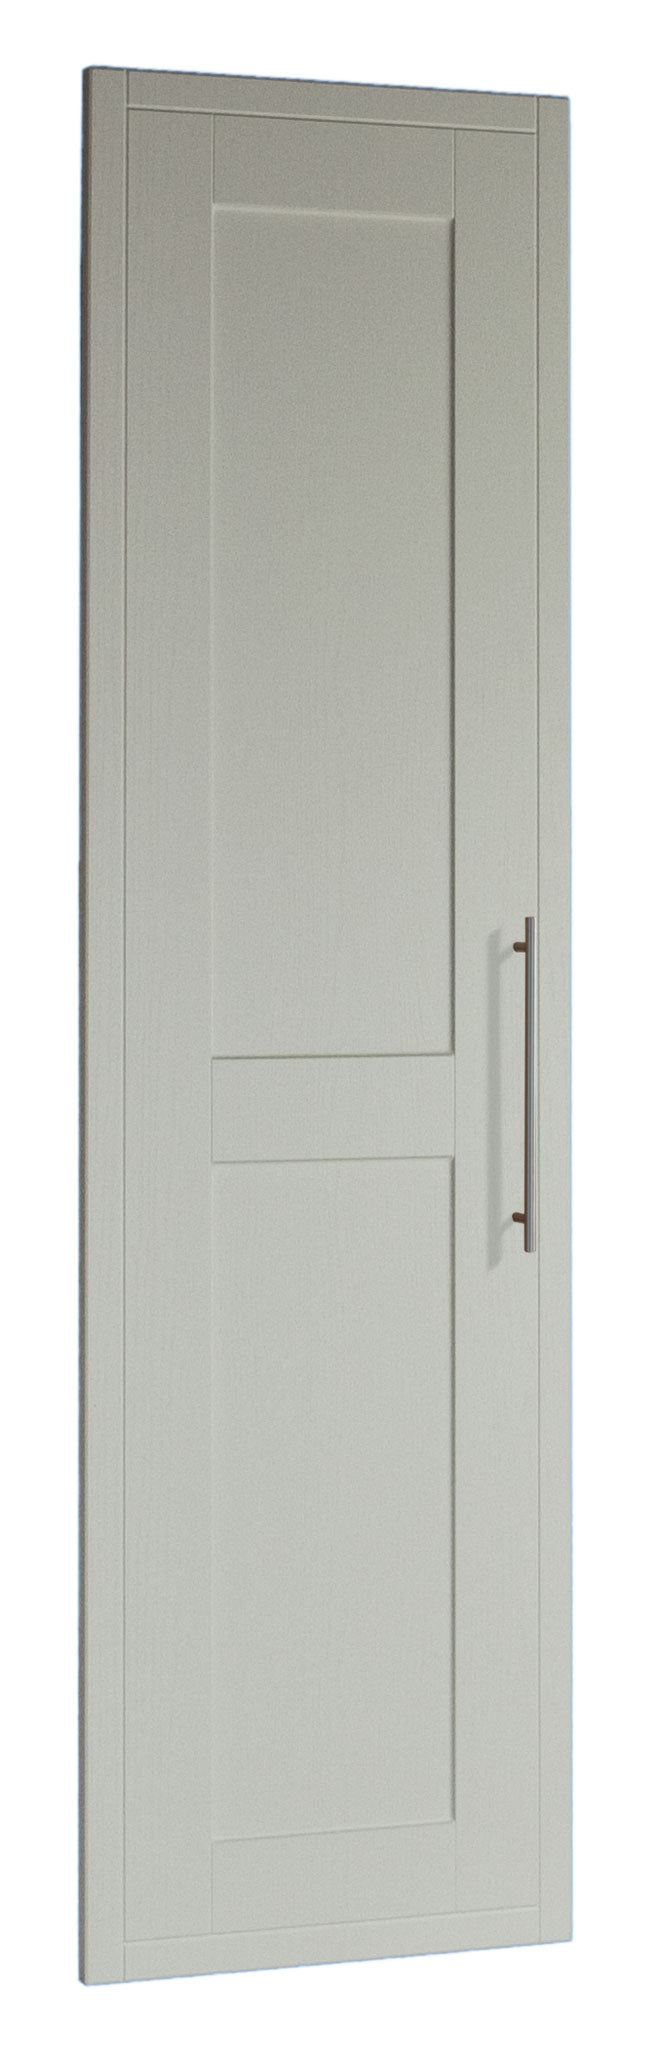 Traditional Keswick cupboard door in any colour